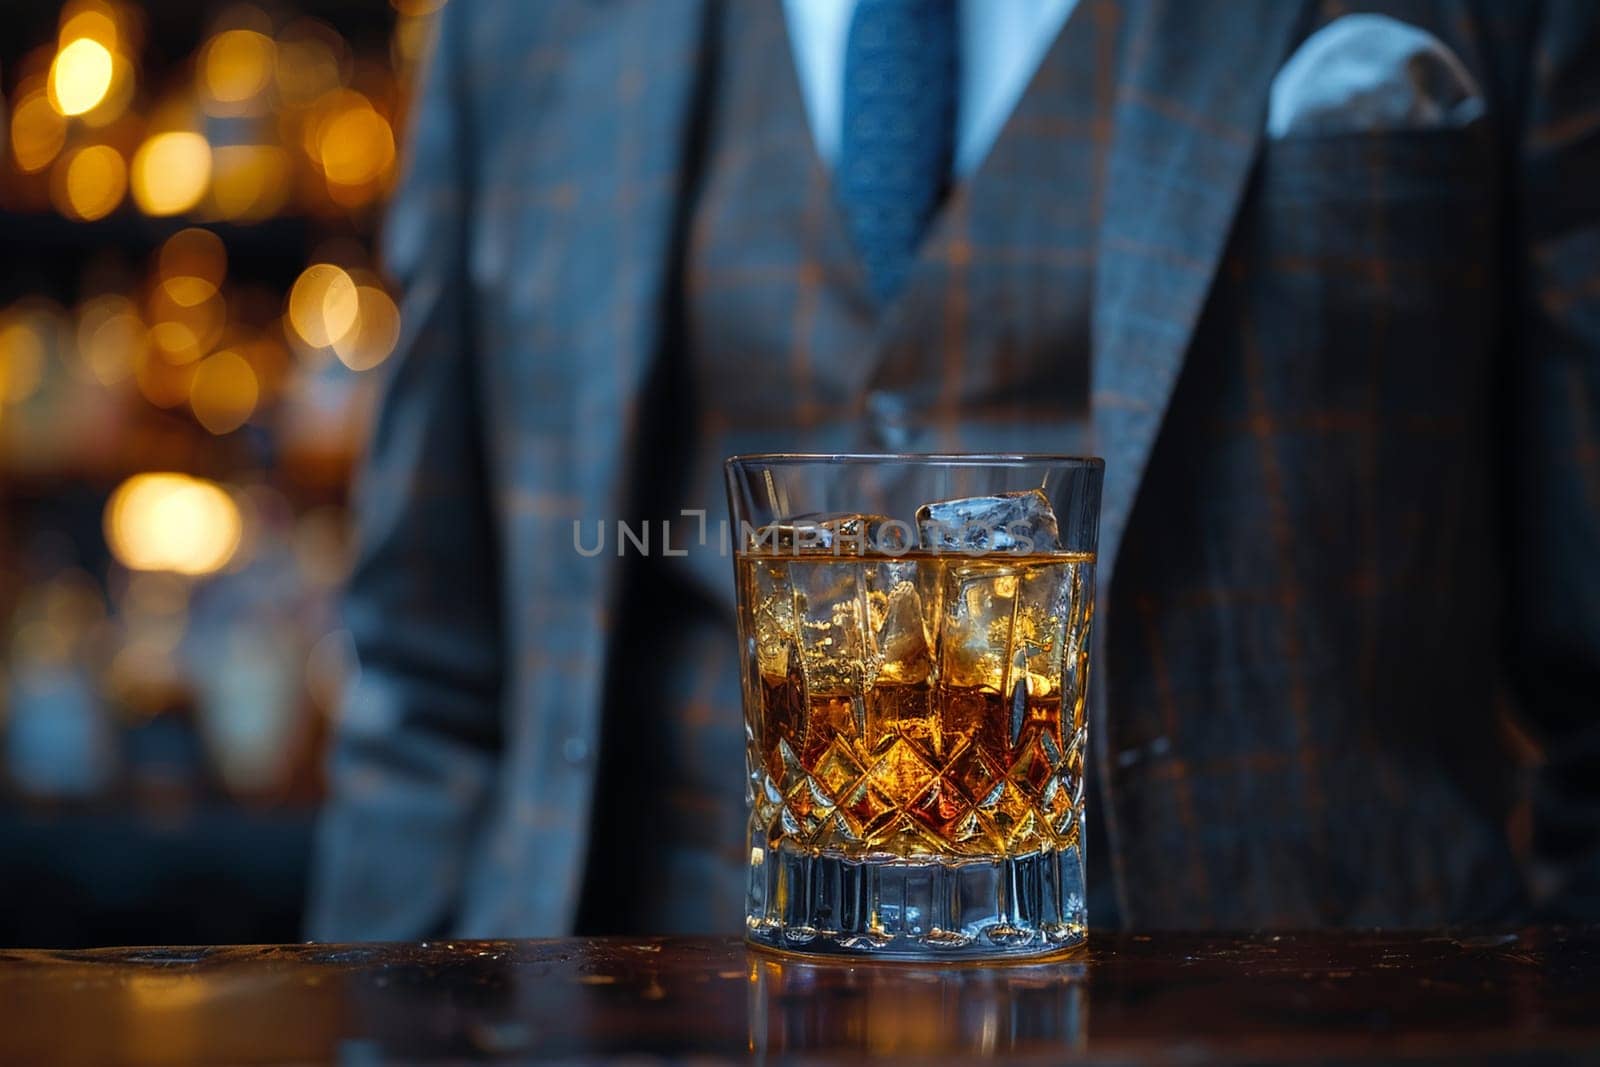 Close-up of whiskey glass on table, businessman in suit enjoying drink background. Luxury lifestyle, relaxation moment captured bar, perfect after work unwind.